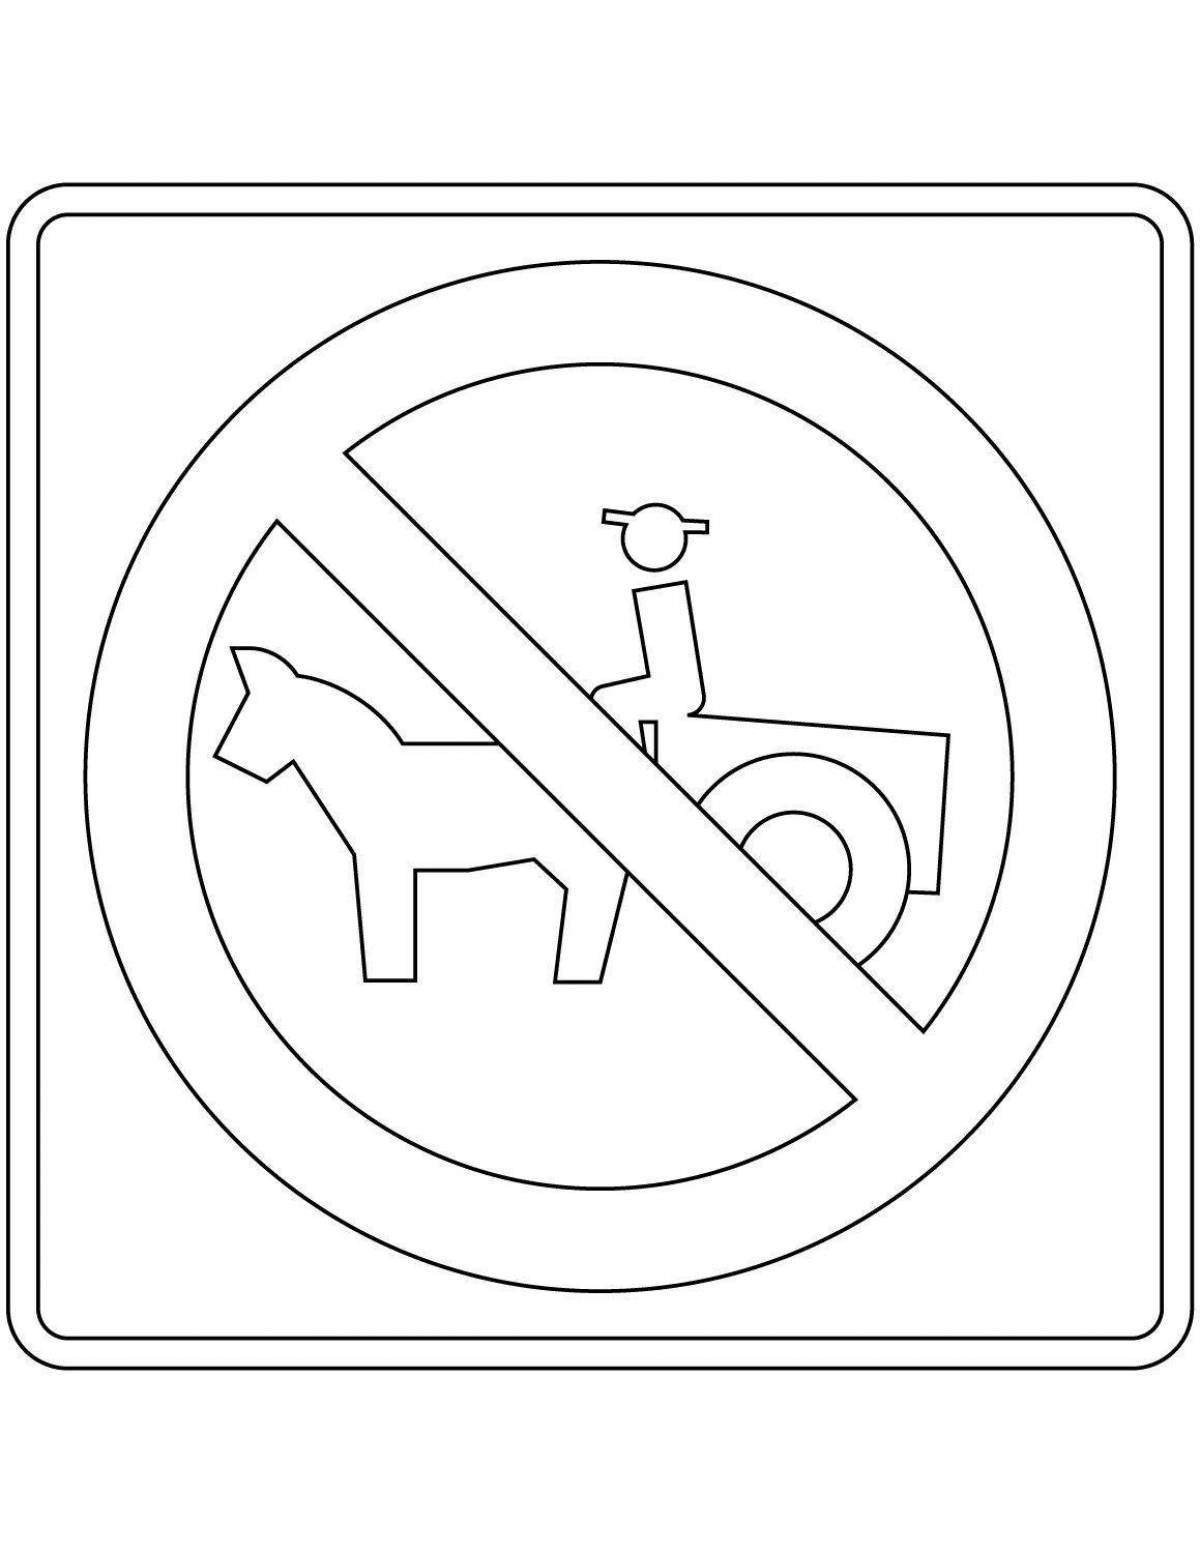 Coloring page mysterious prohibition road sign